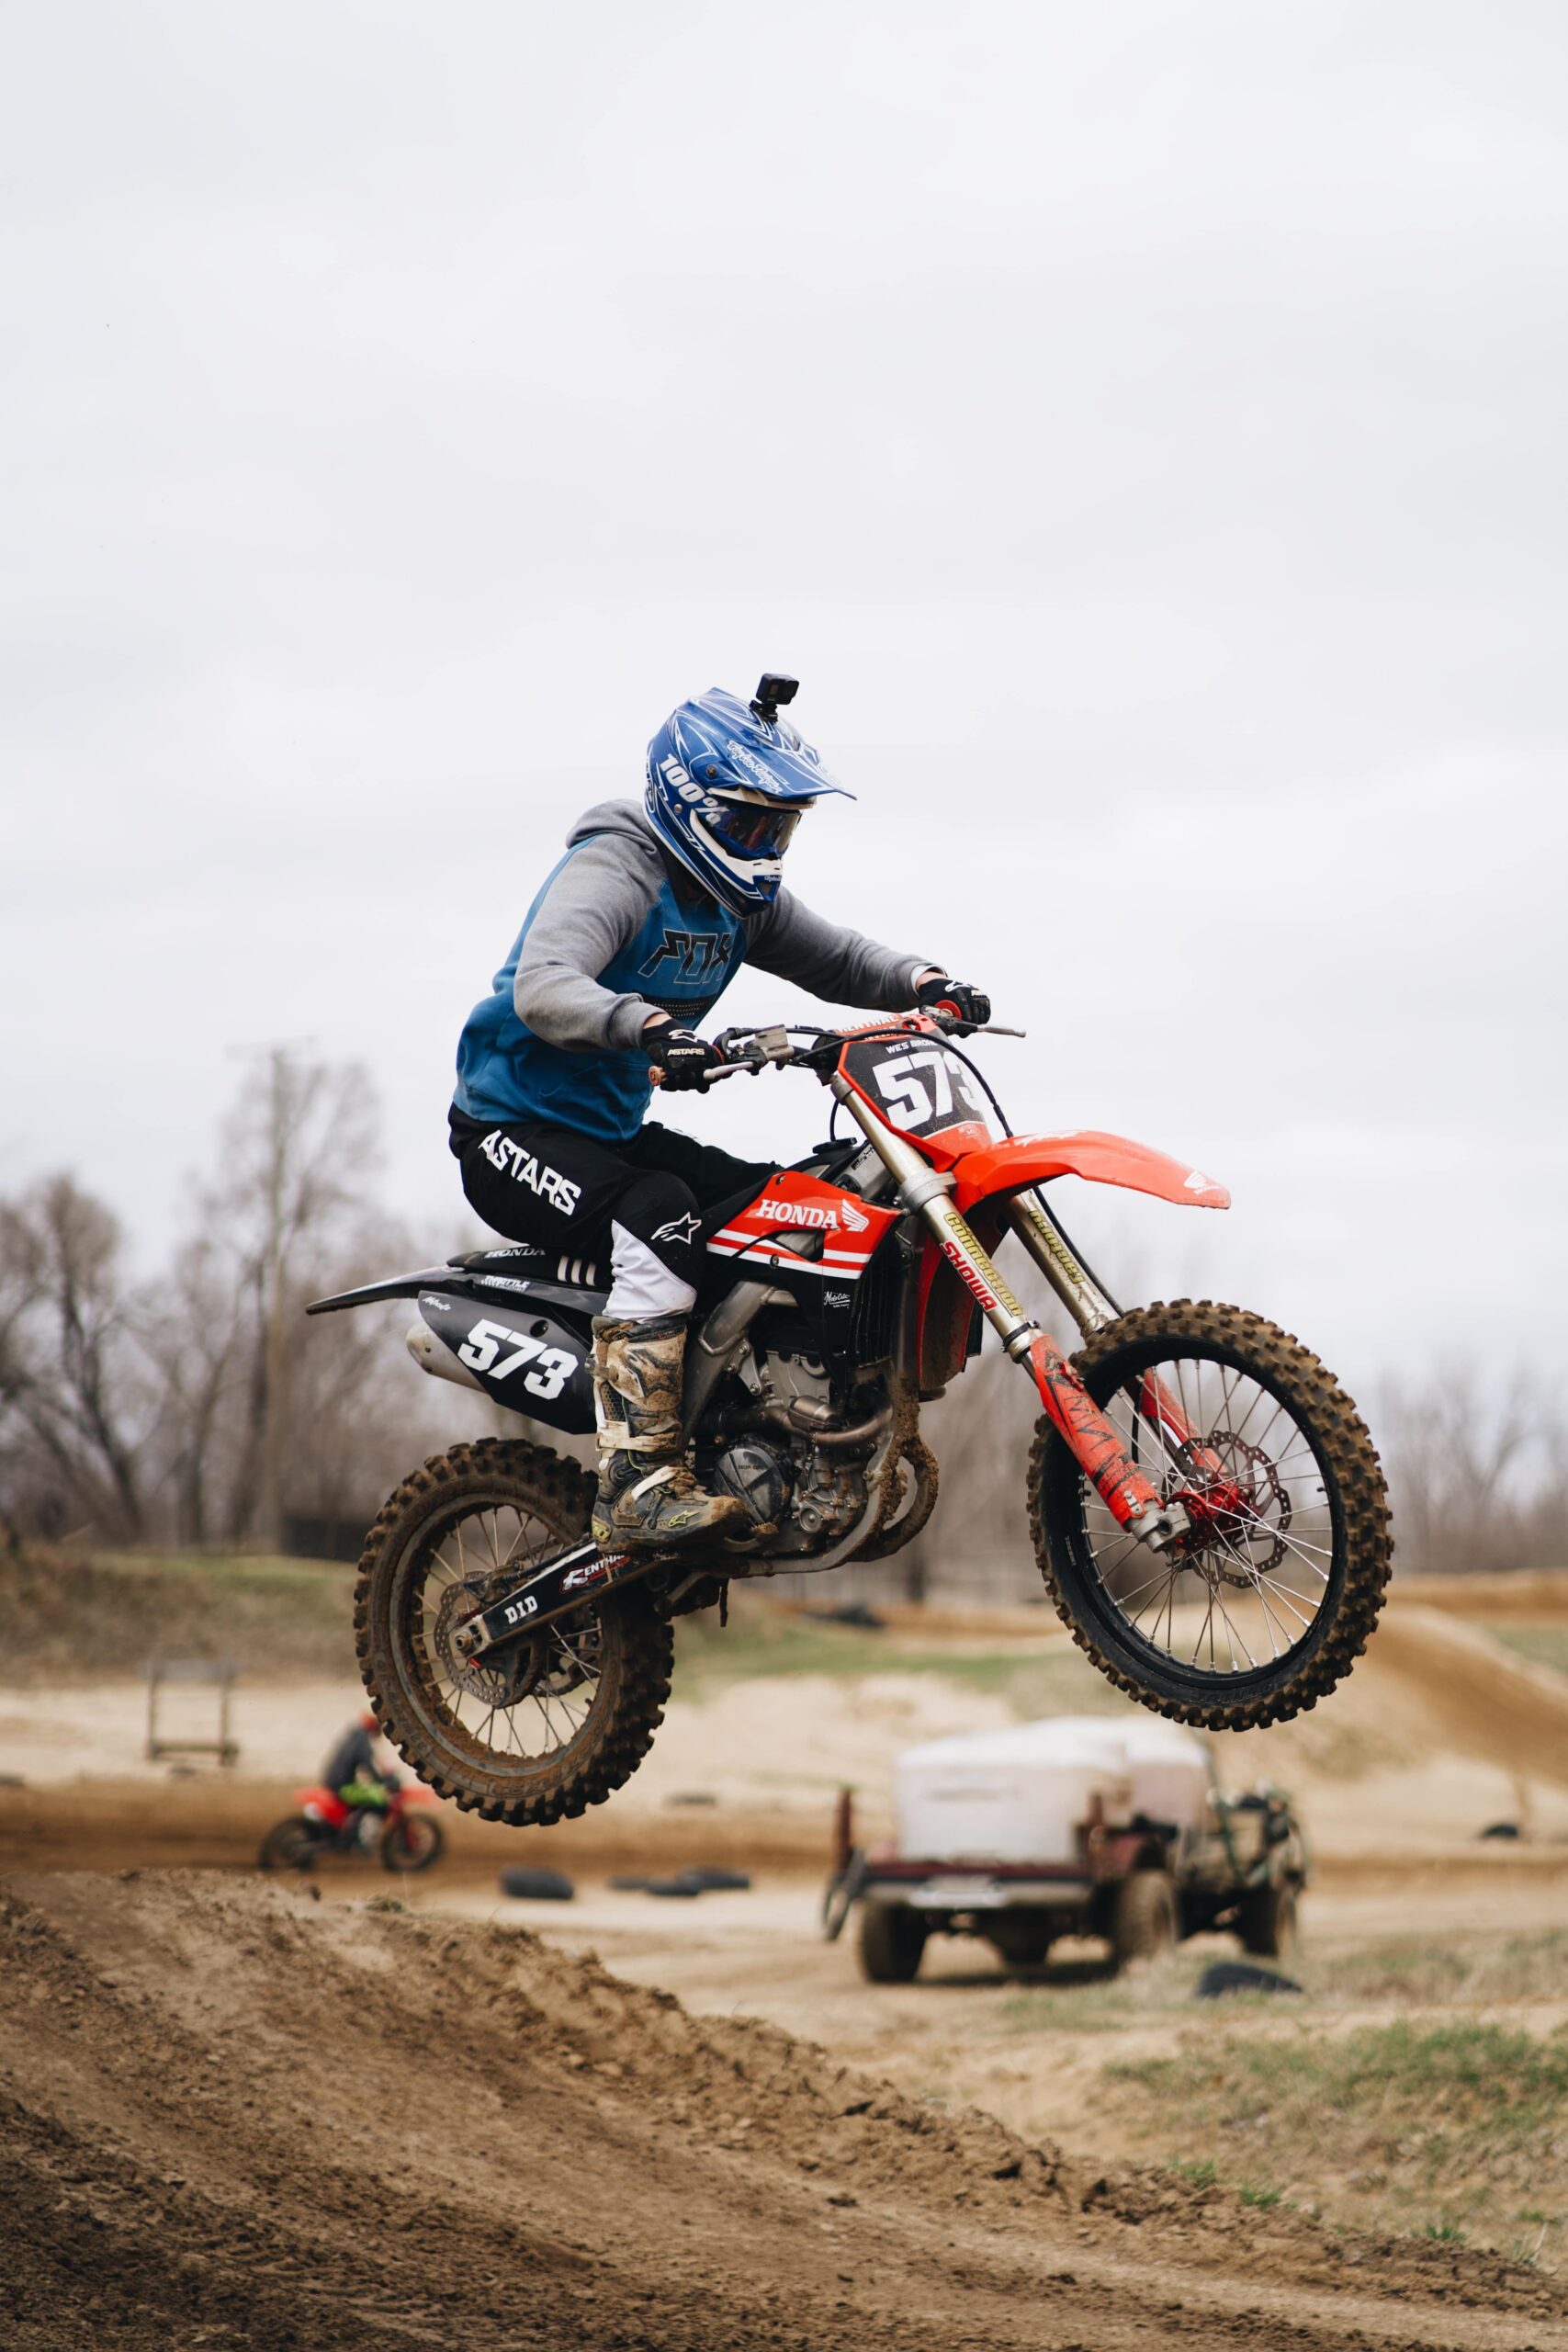 Sitting and Standing position on a dirt bike - 8 basic dirt bike tips and tricks